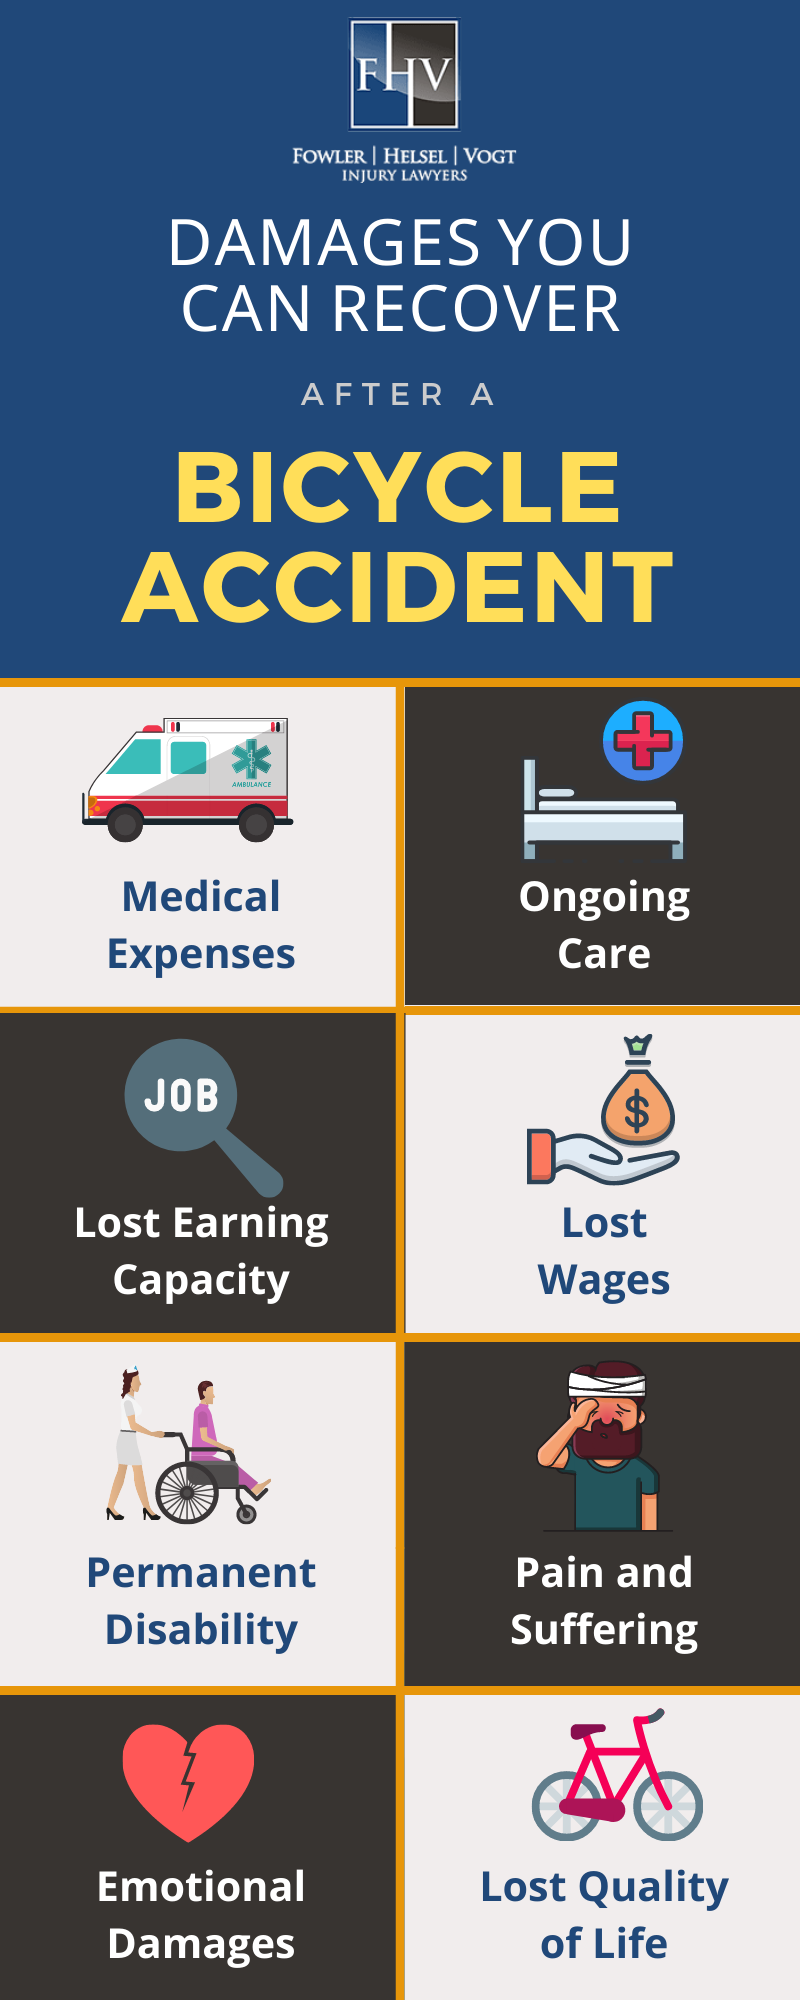 Damages you can recover after a bike crash infographic